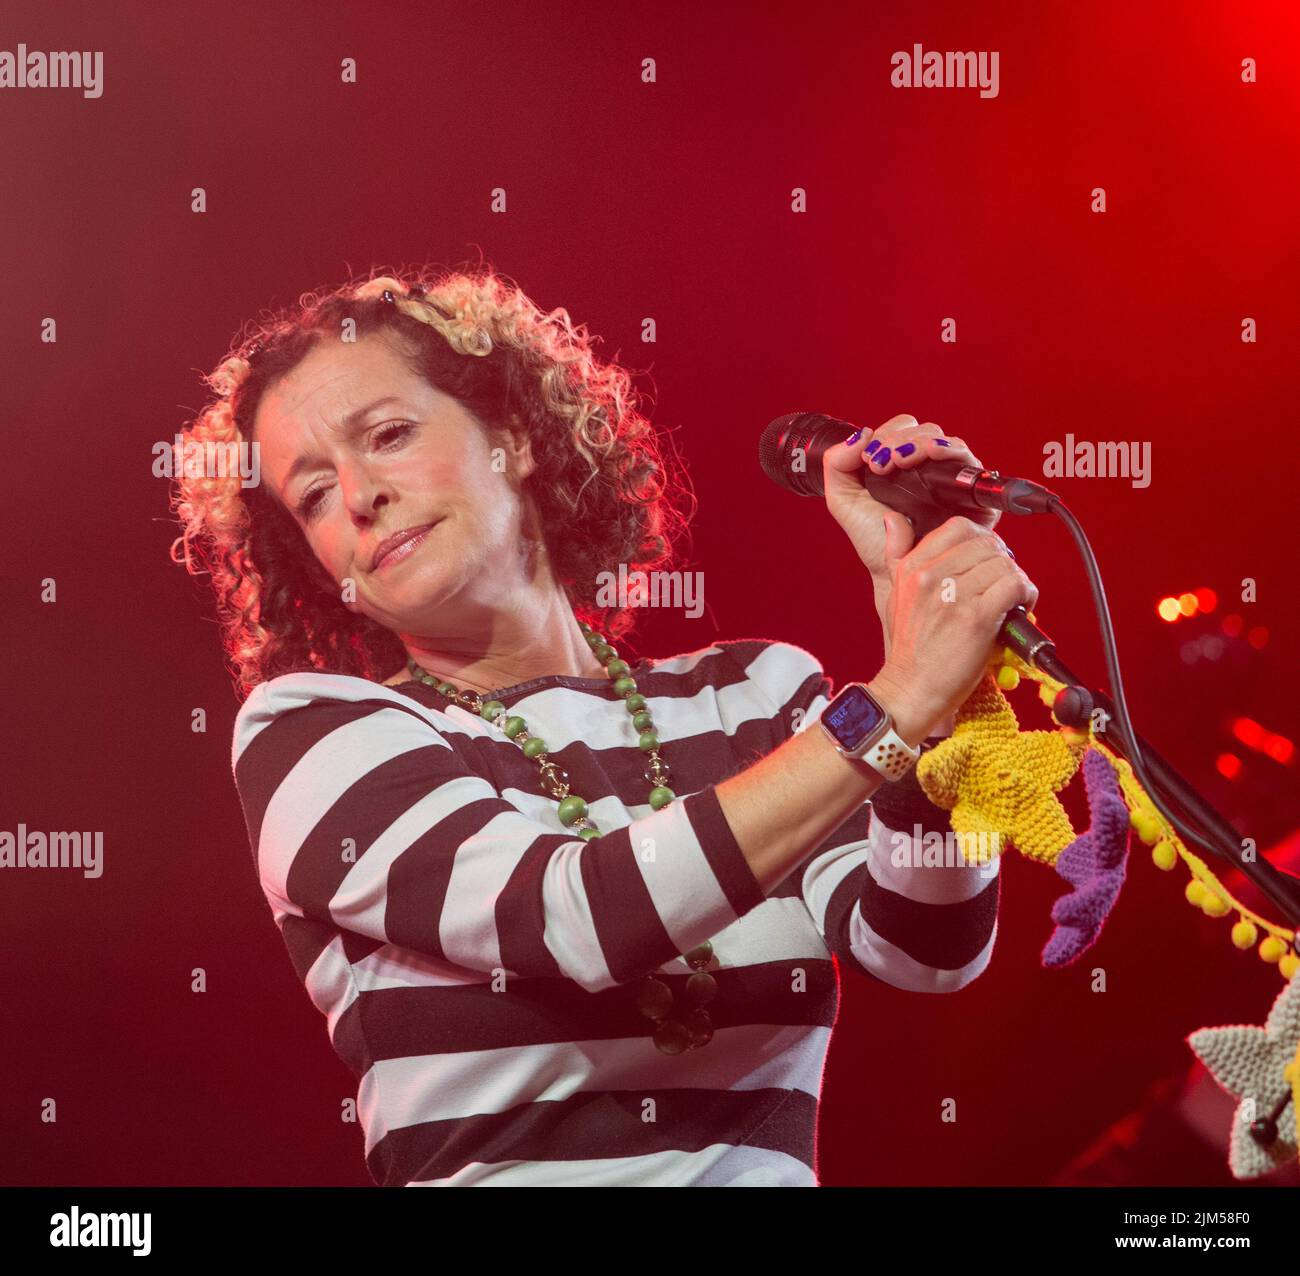 Sidmouth, 4th August 2022 Kate Rusby headlines the bill at the Sidmouth Folk Festival as she celebrates 30 years in her unofficial role as the Queen of British folk music. Tony Charnock/Alamy Live News Stock Photo